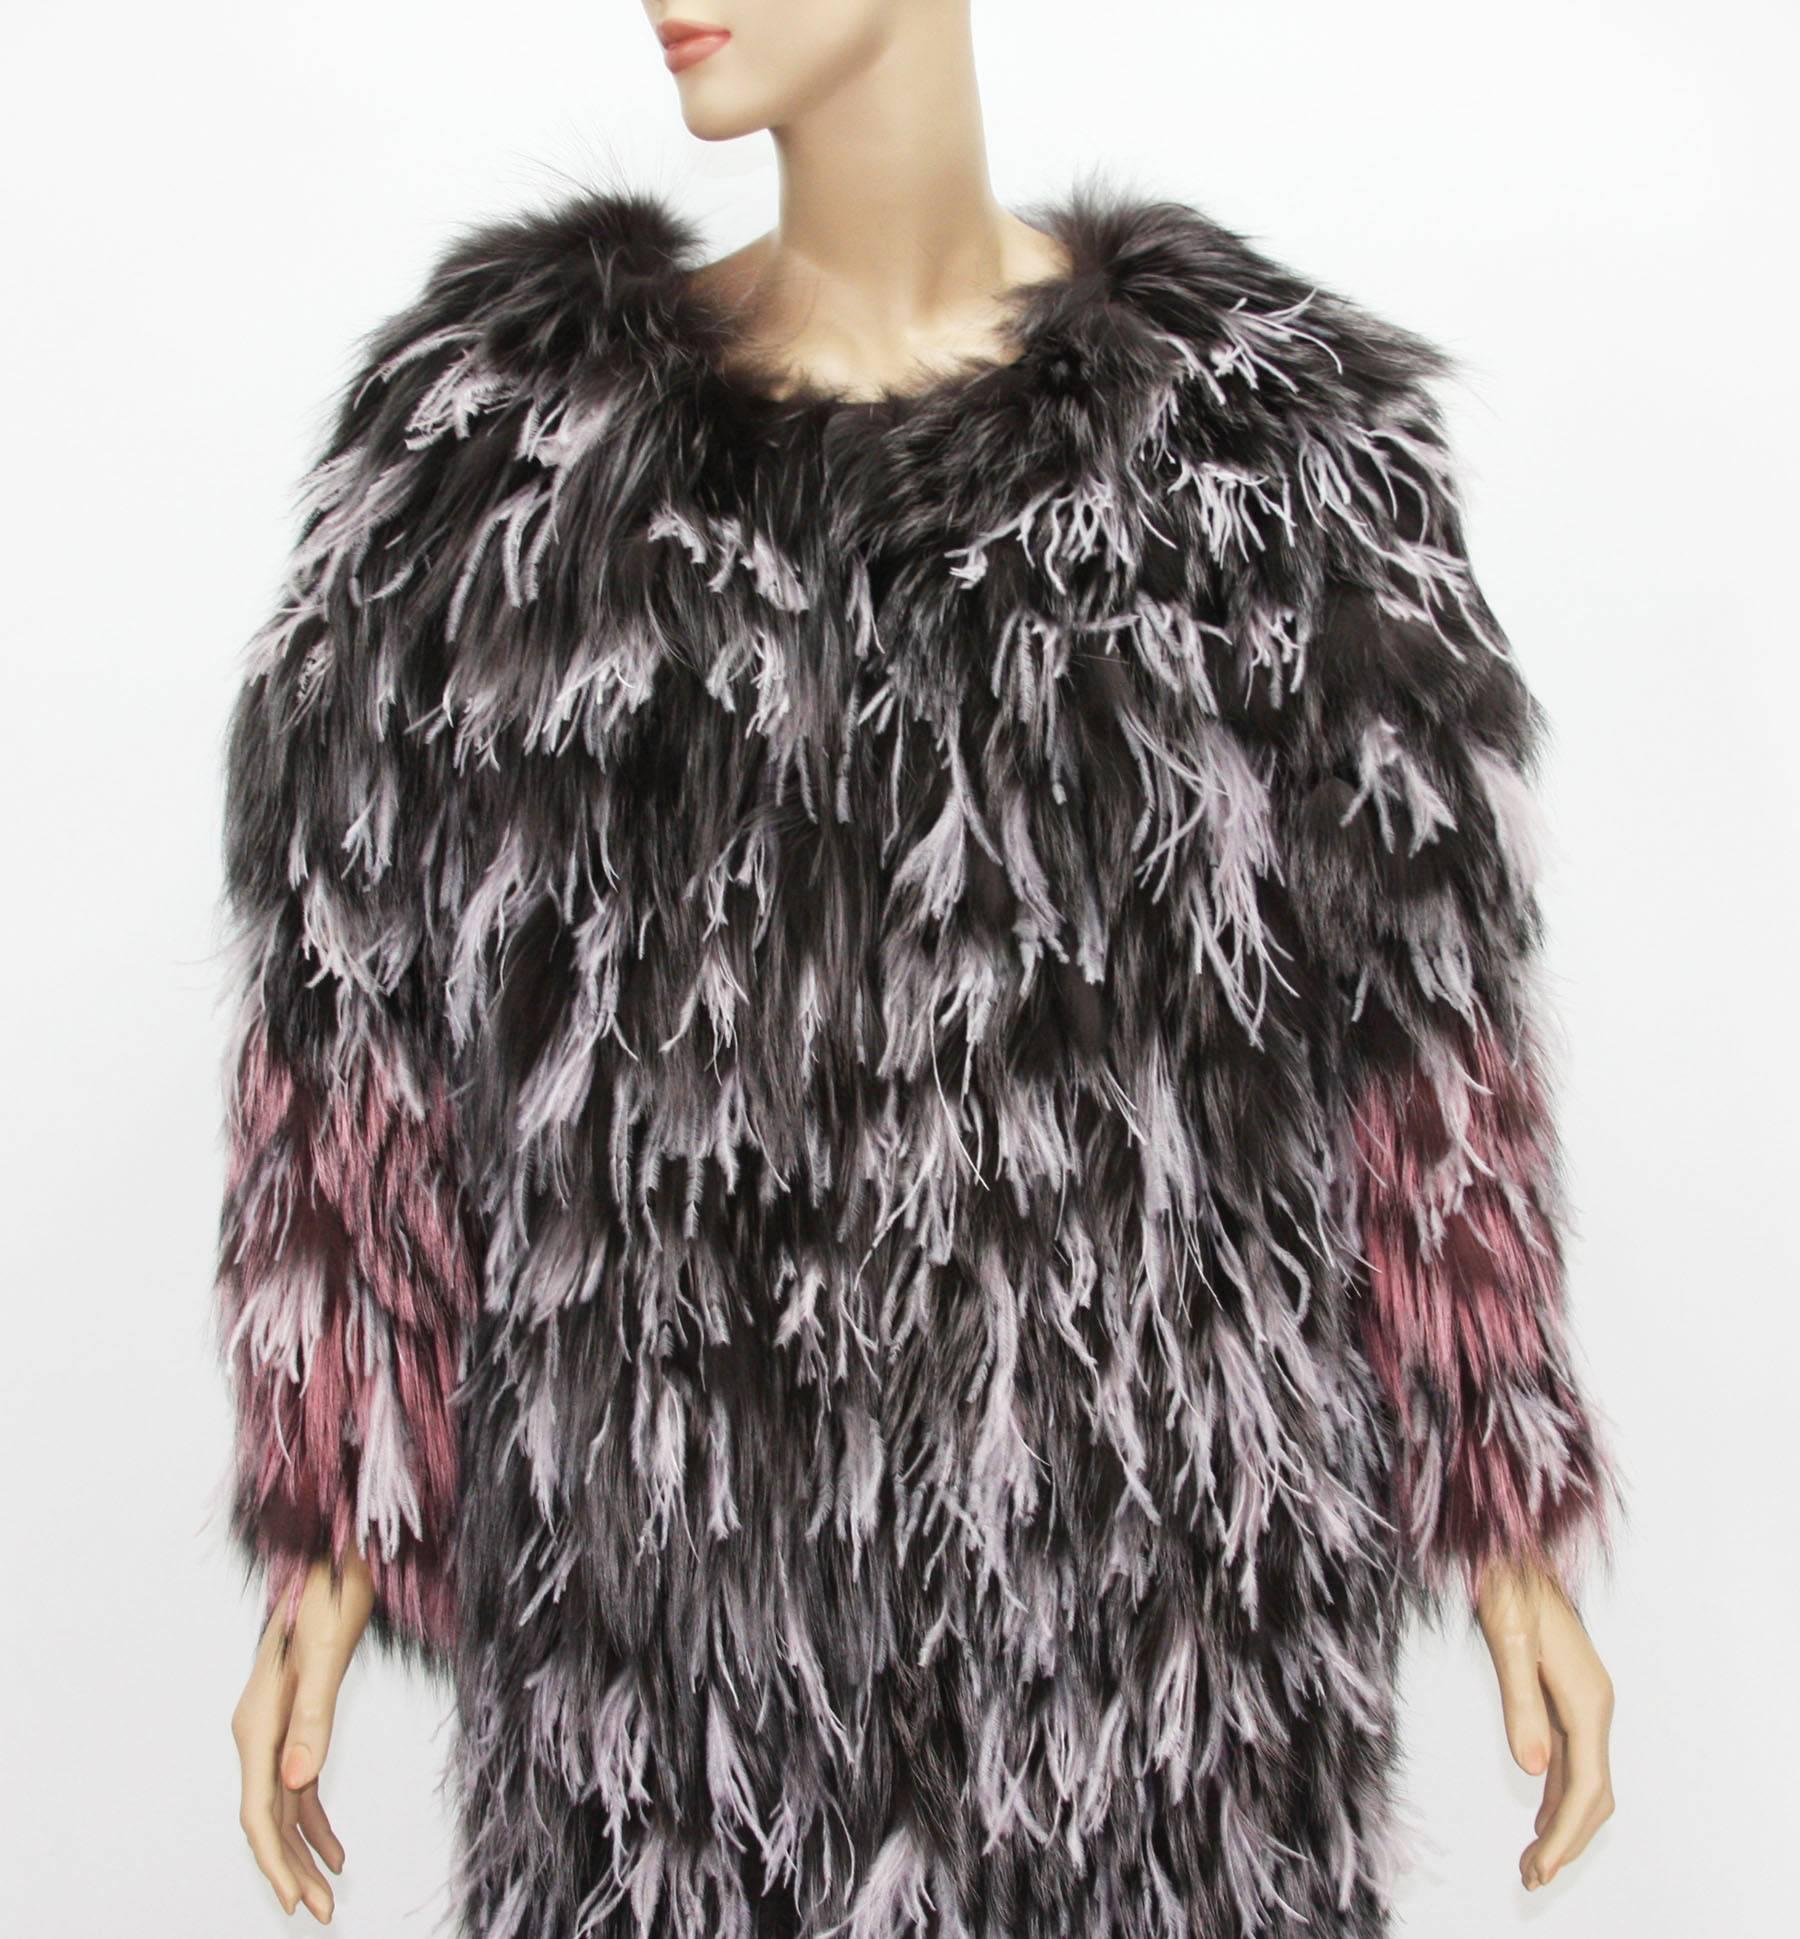 Exotic Oscar de la Renta Ostrich Feathers and Fox Fur Evening Coat Jacket In Excellent Condition For Sale In Montgomery, TX